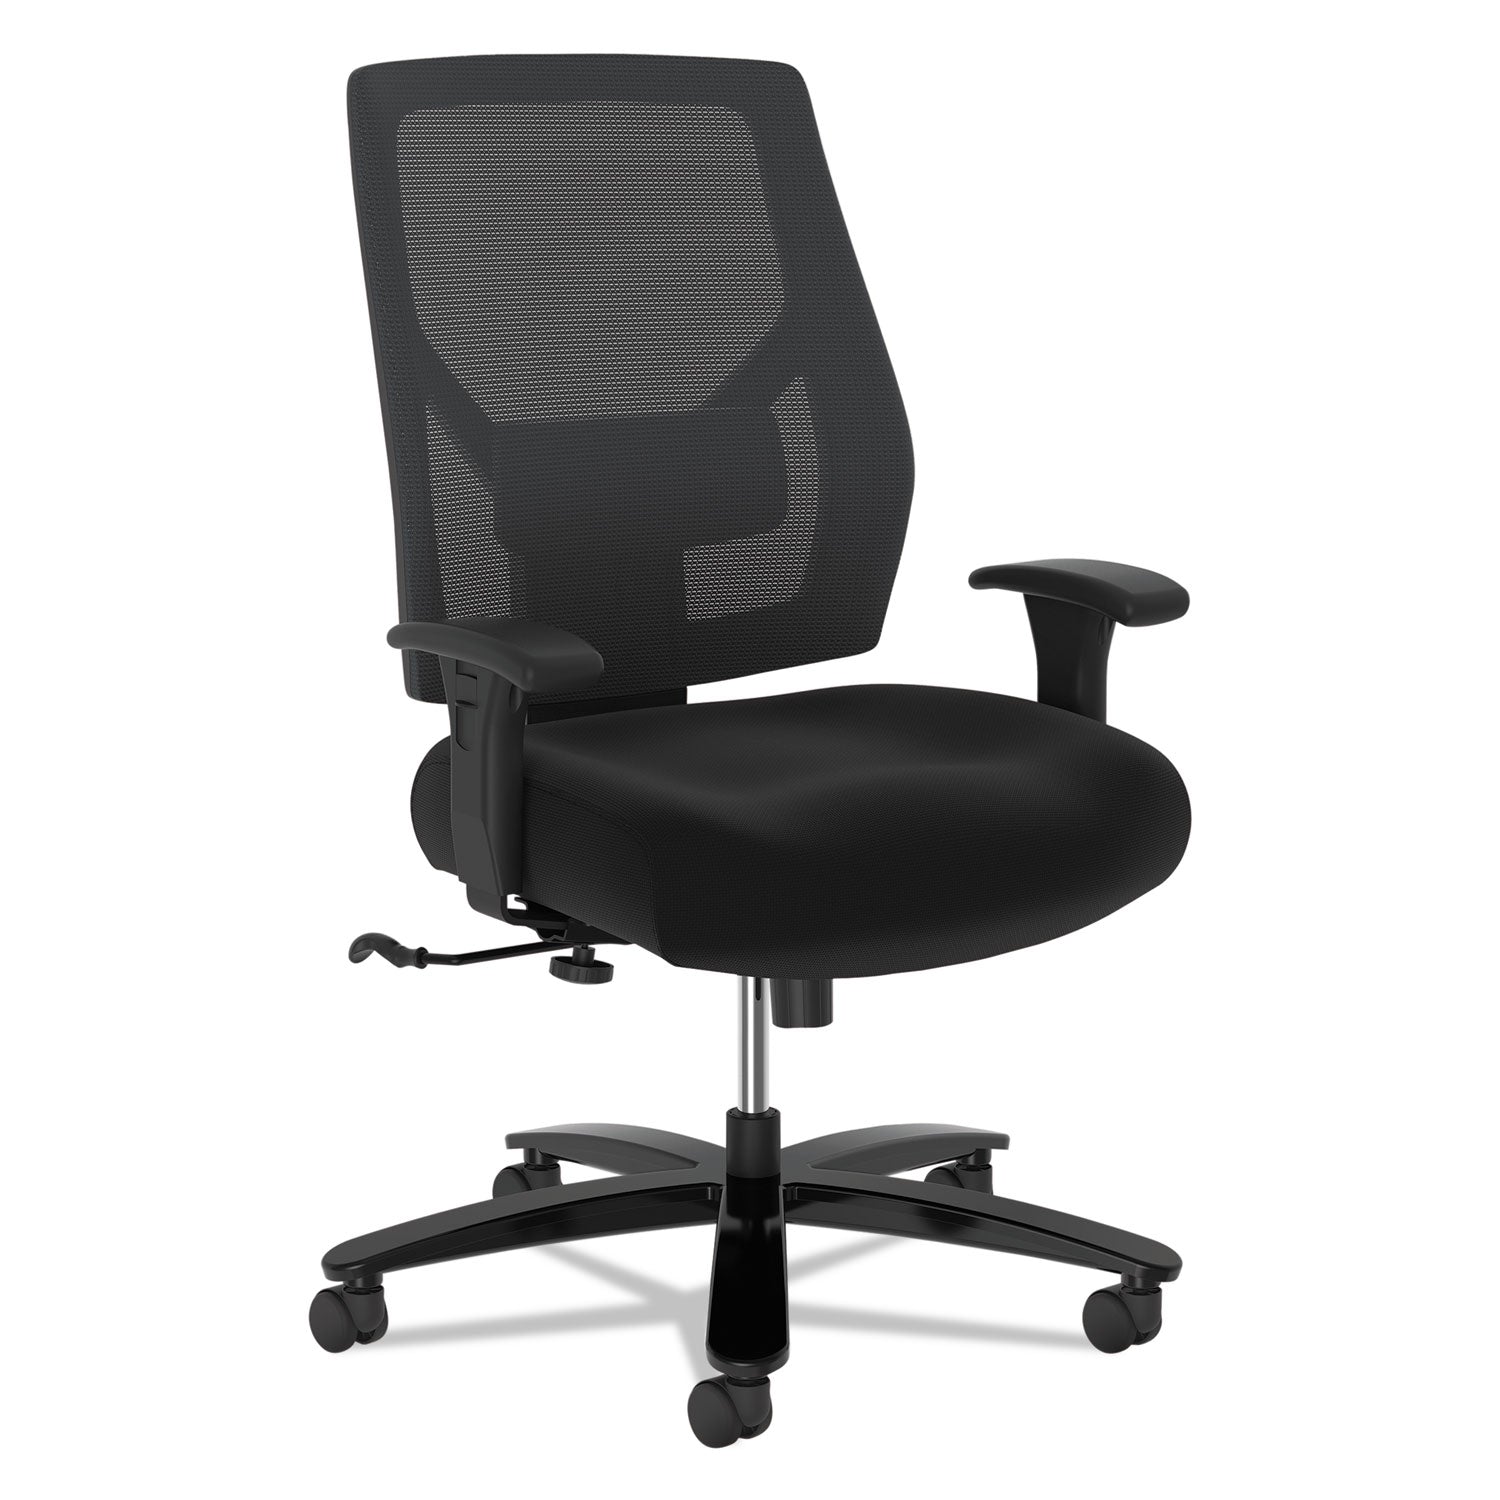 crio-big-and-tall-mid-back-task-chair-supports-up-to-450-lb-18-to-22-seat-height-black_bsxvl585es10t - 1